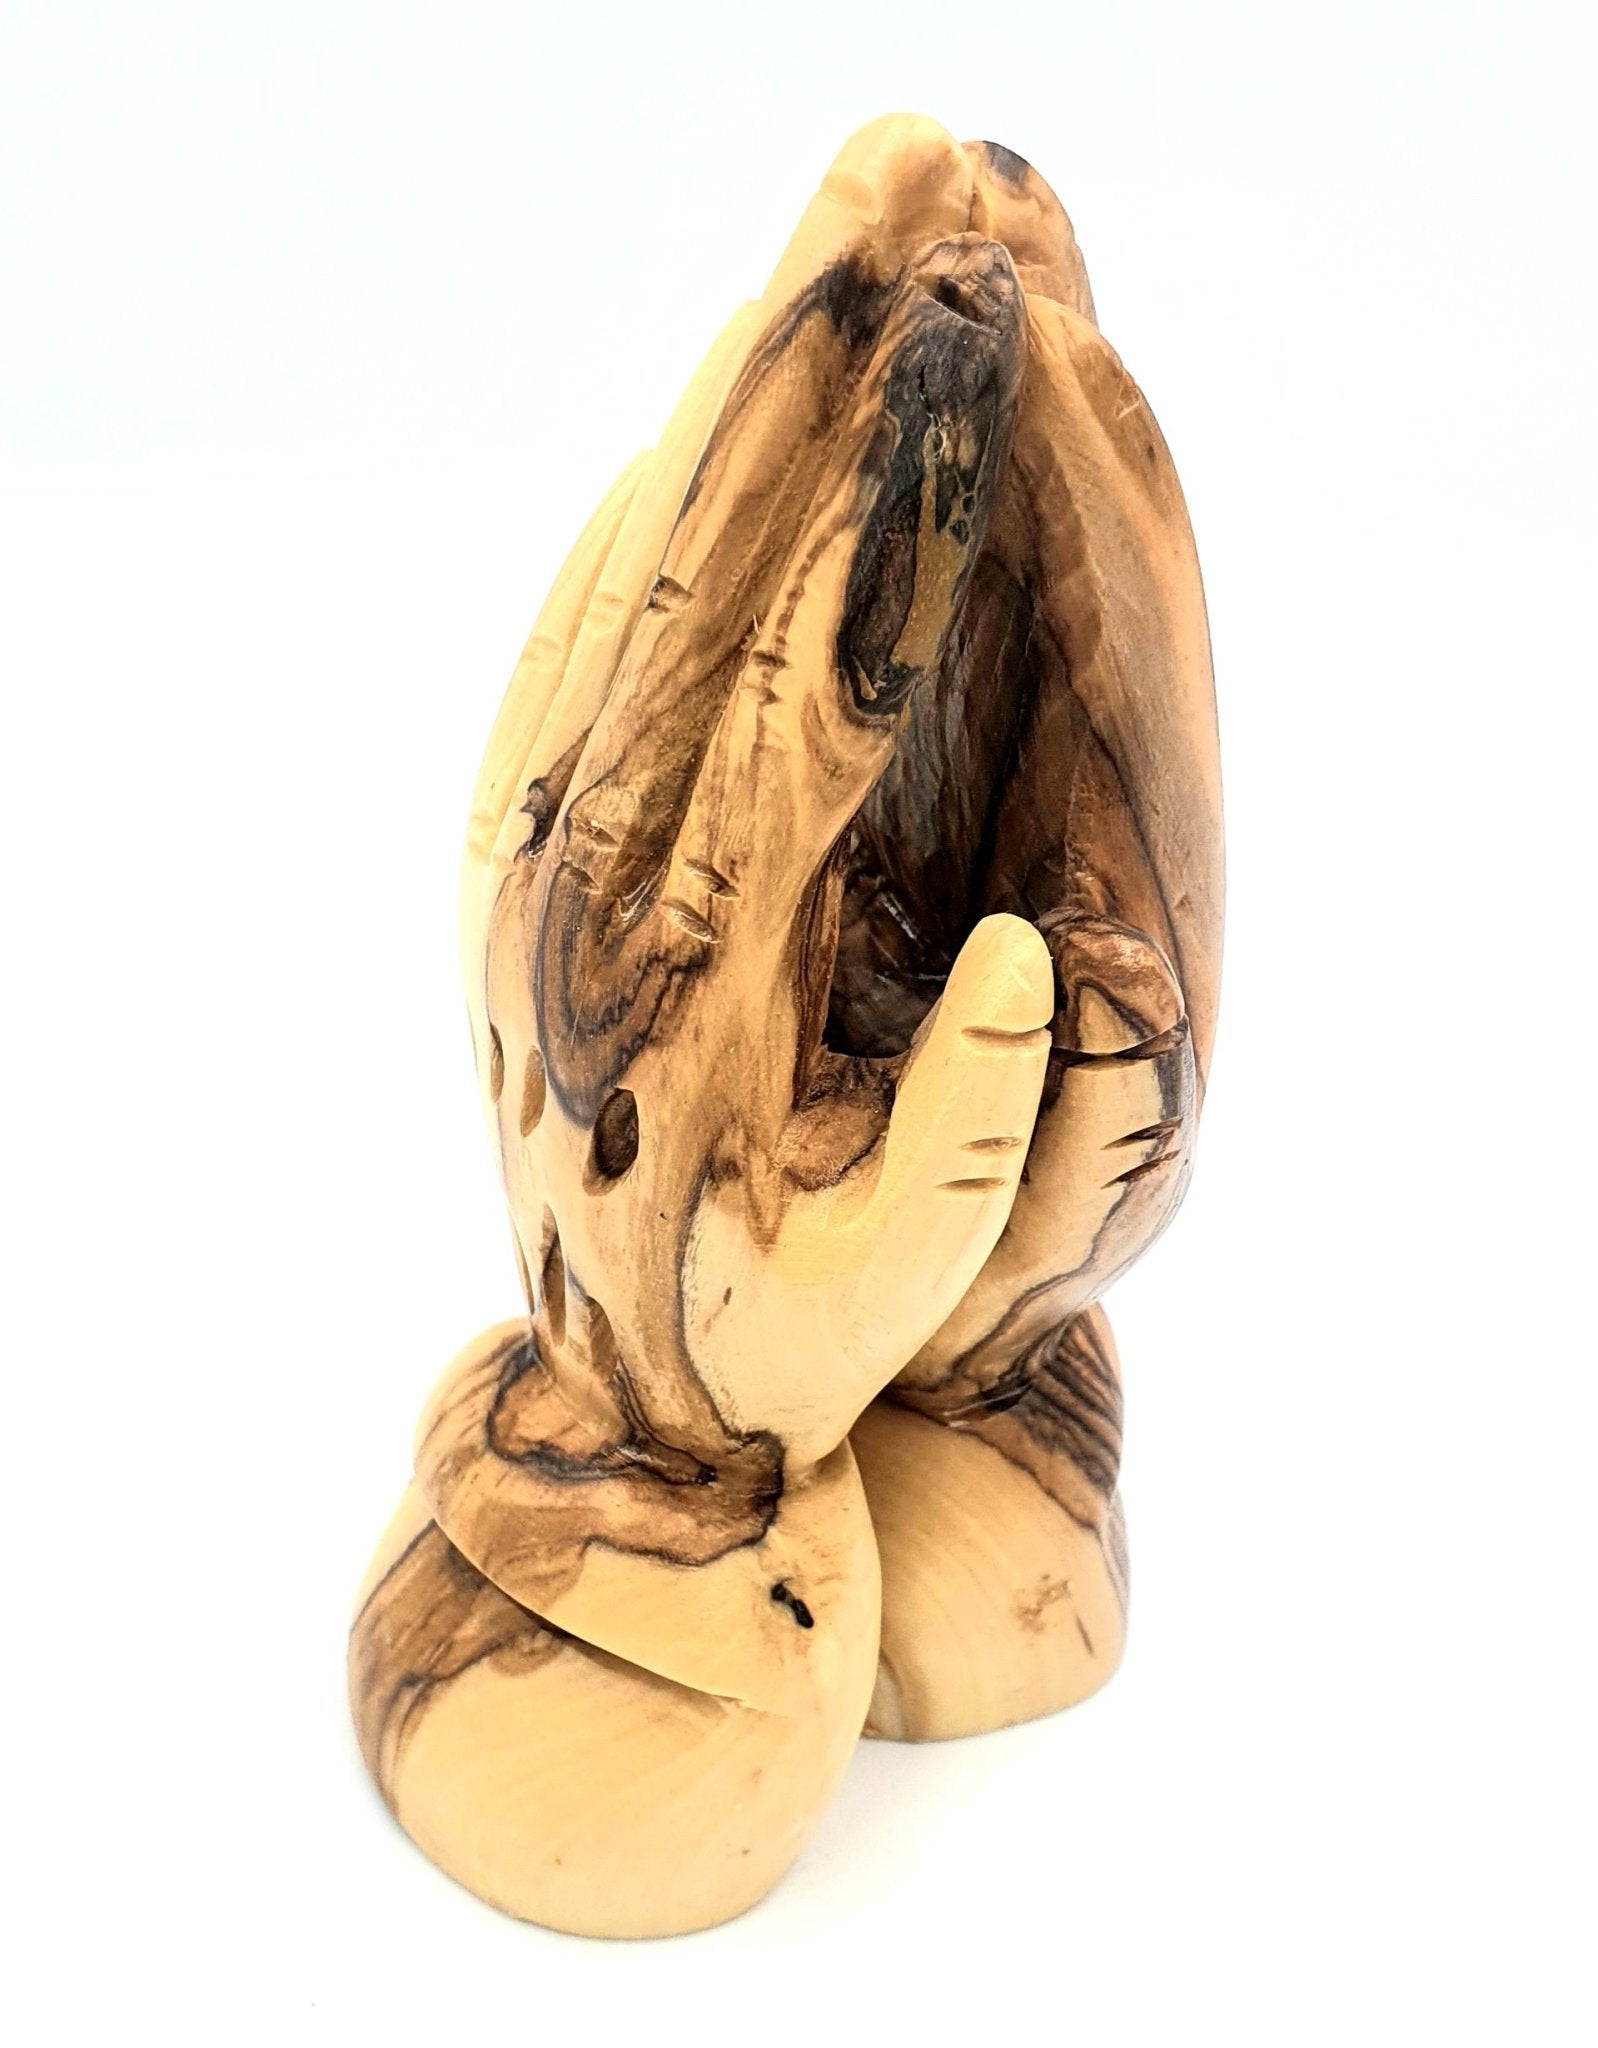 Zuluf Small Olive Wood Praying Hands Statue - 4.3 Inches - Handcrafted Spiritual Sculpture - Zuluf